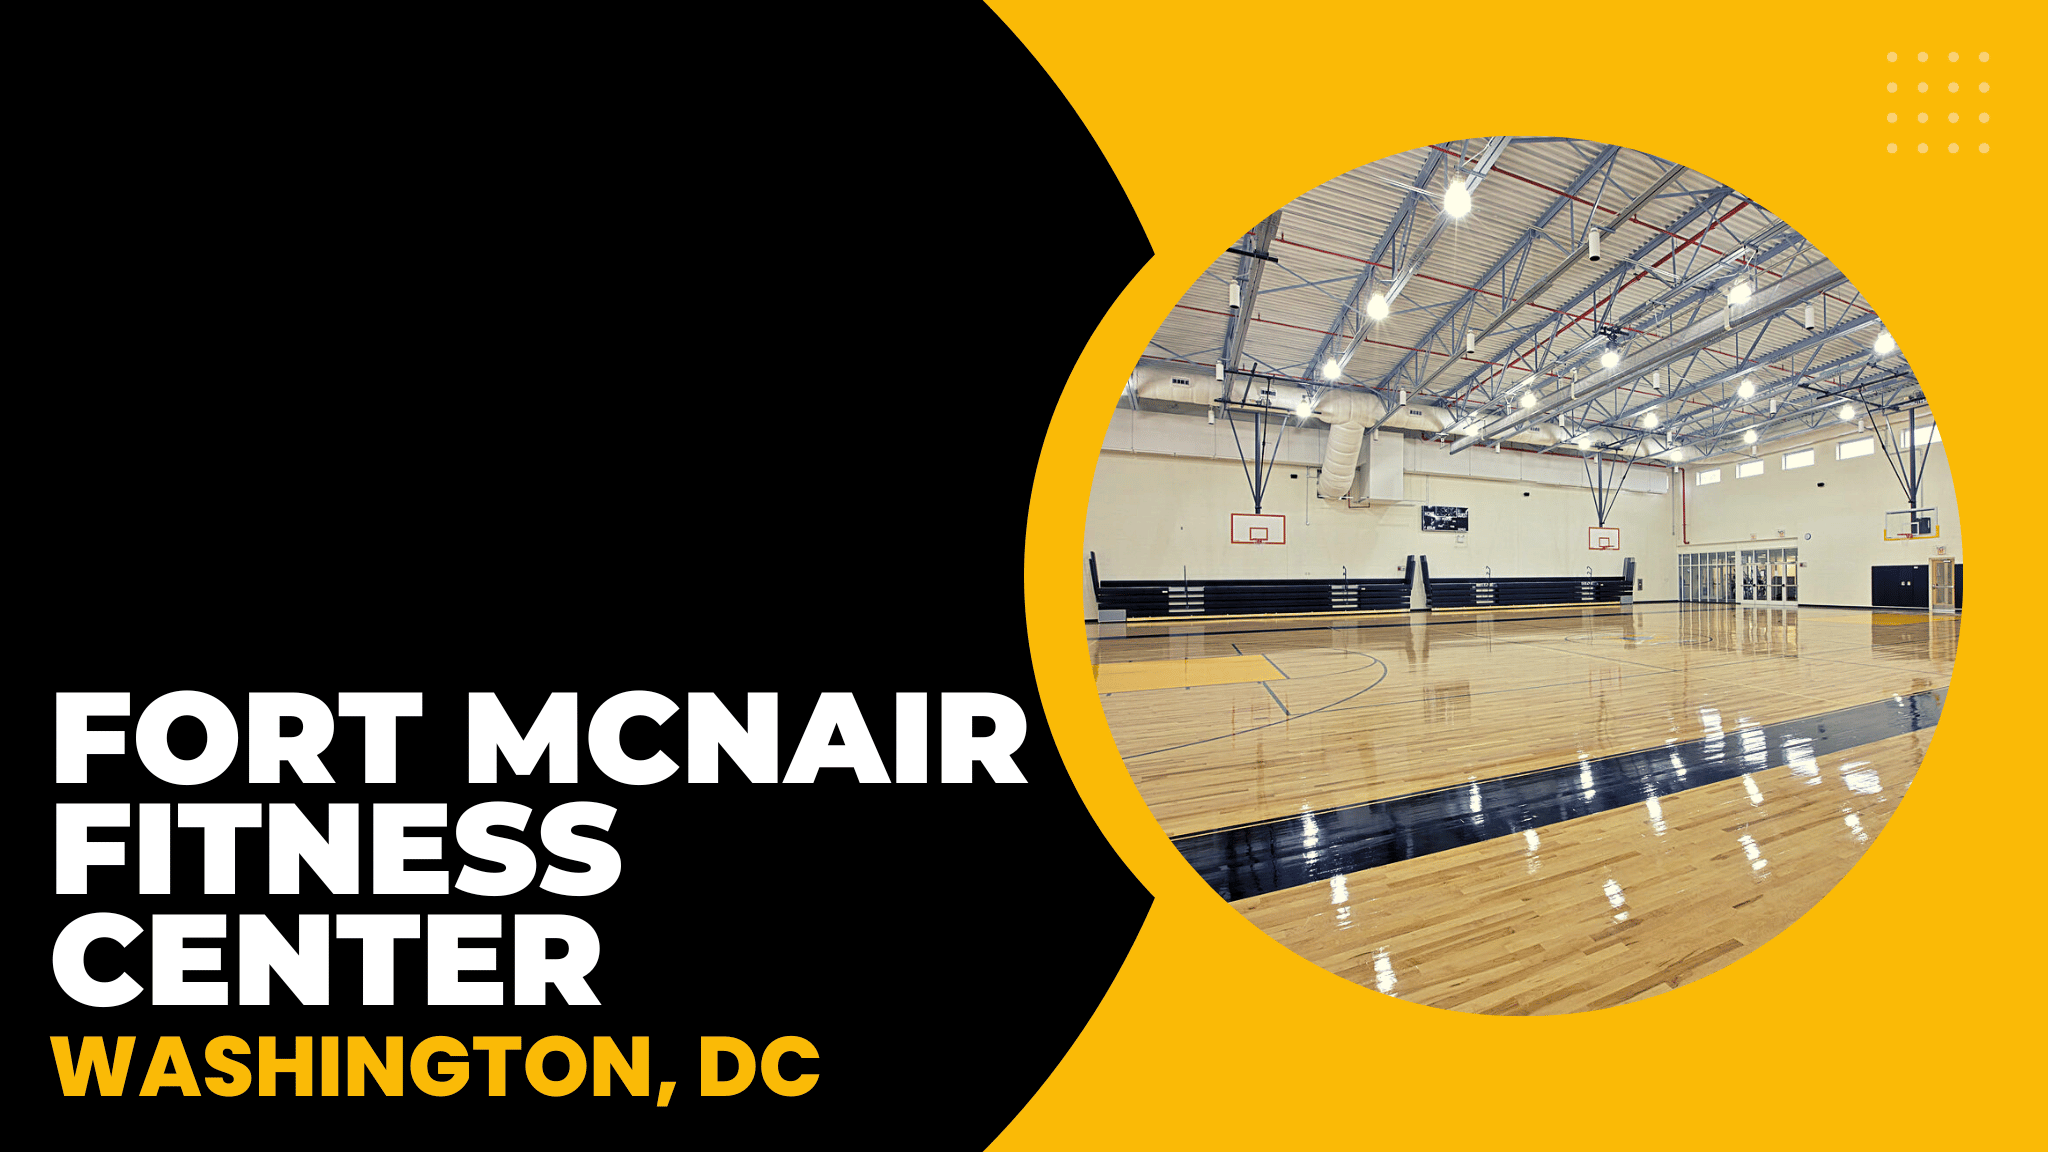 Fort Mcnair Fitness Center